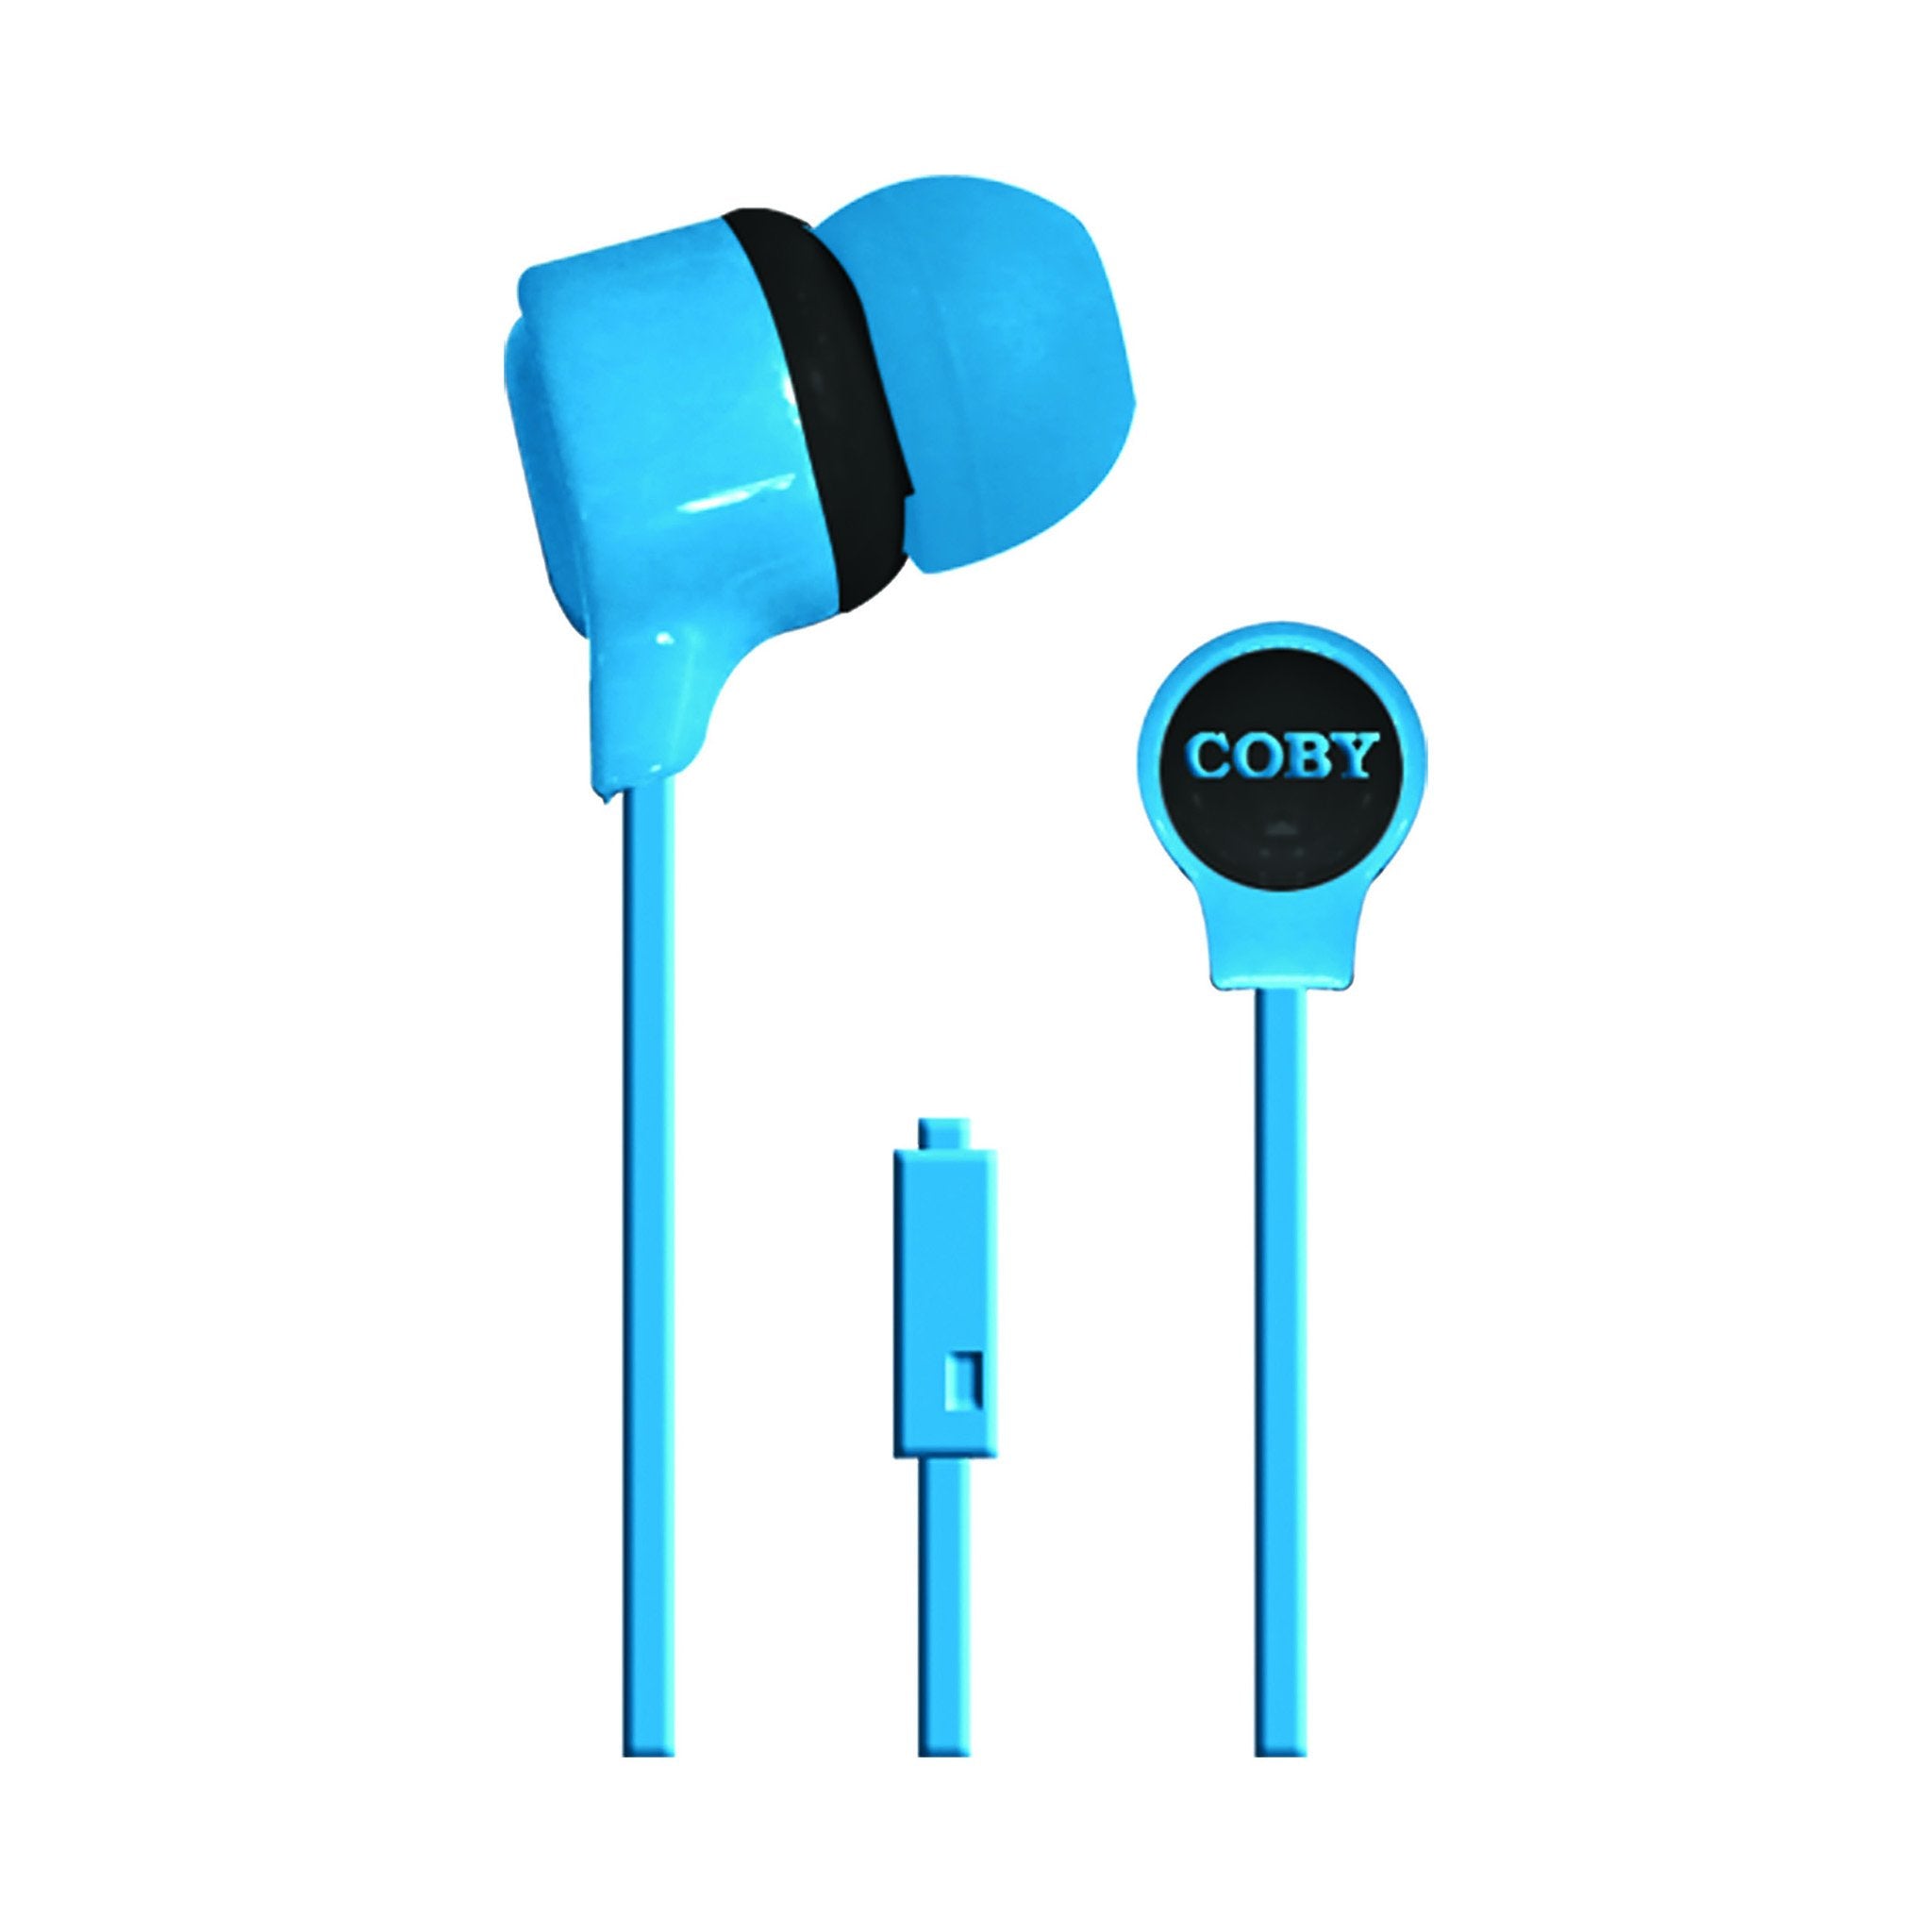 Tempo Stereo Earbuds